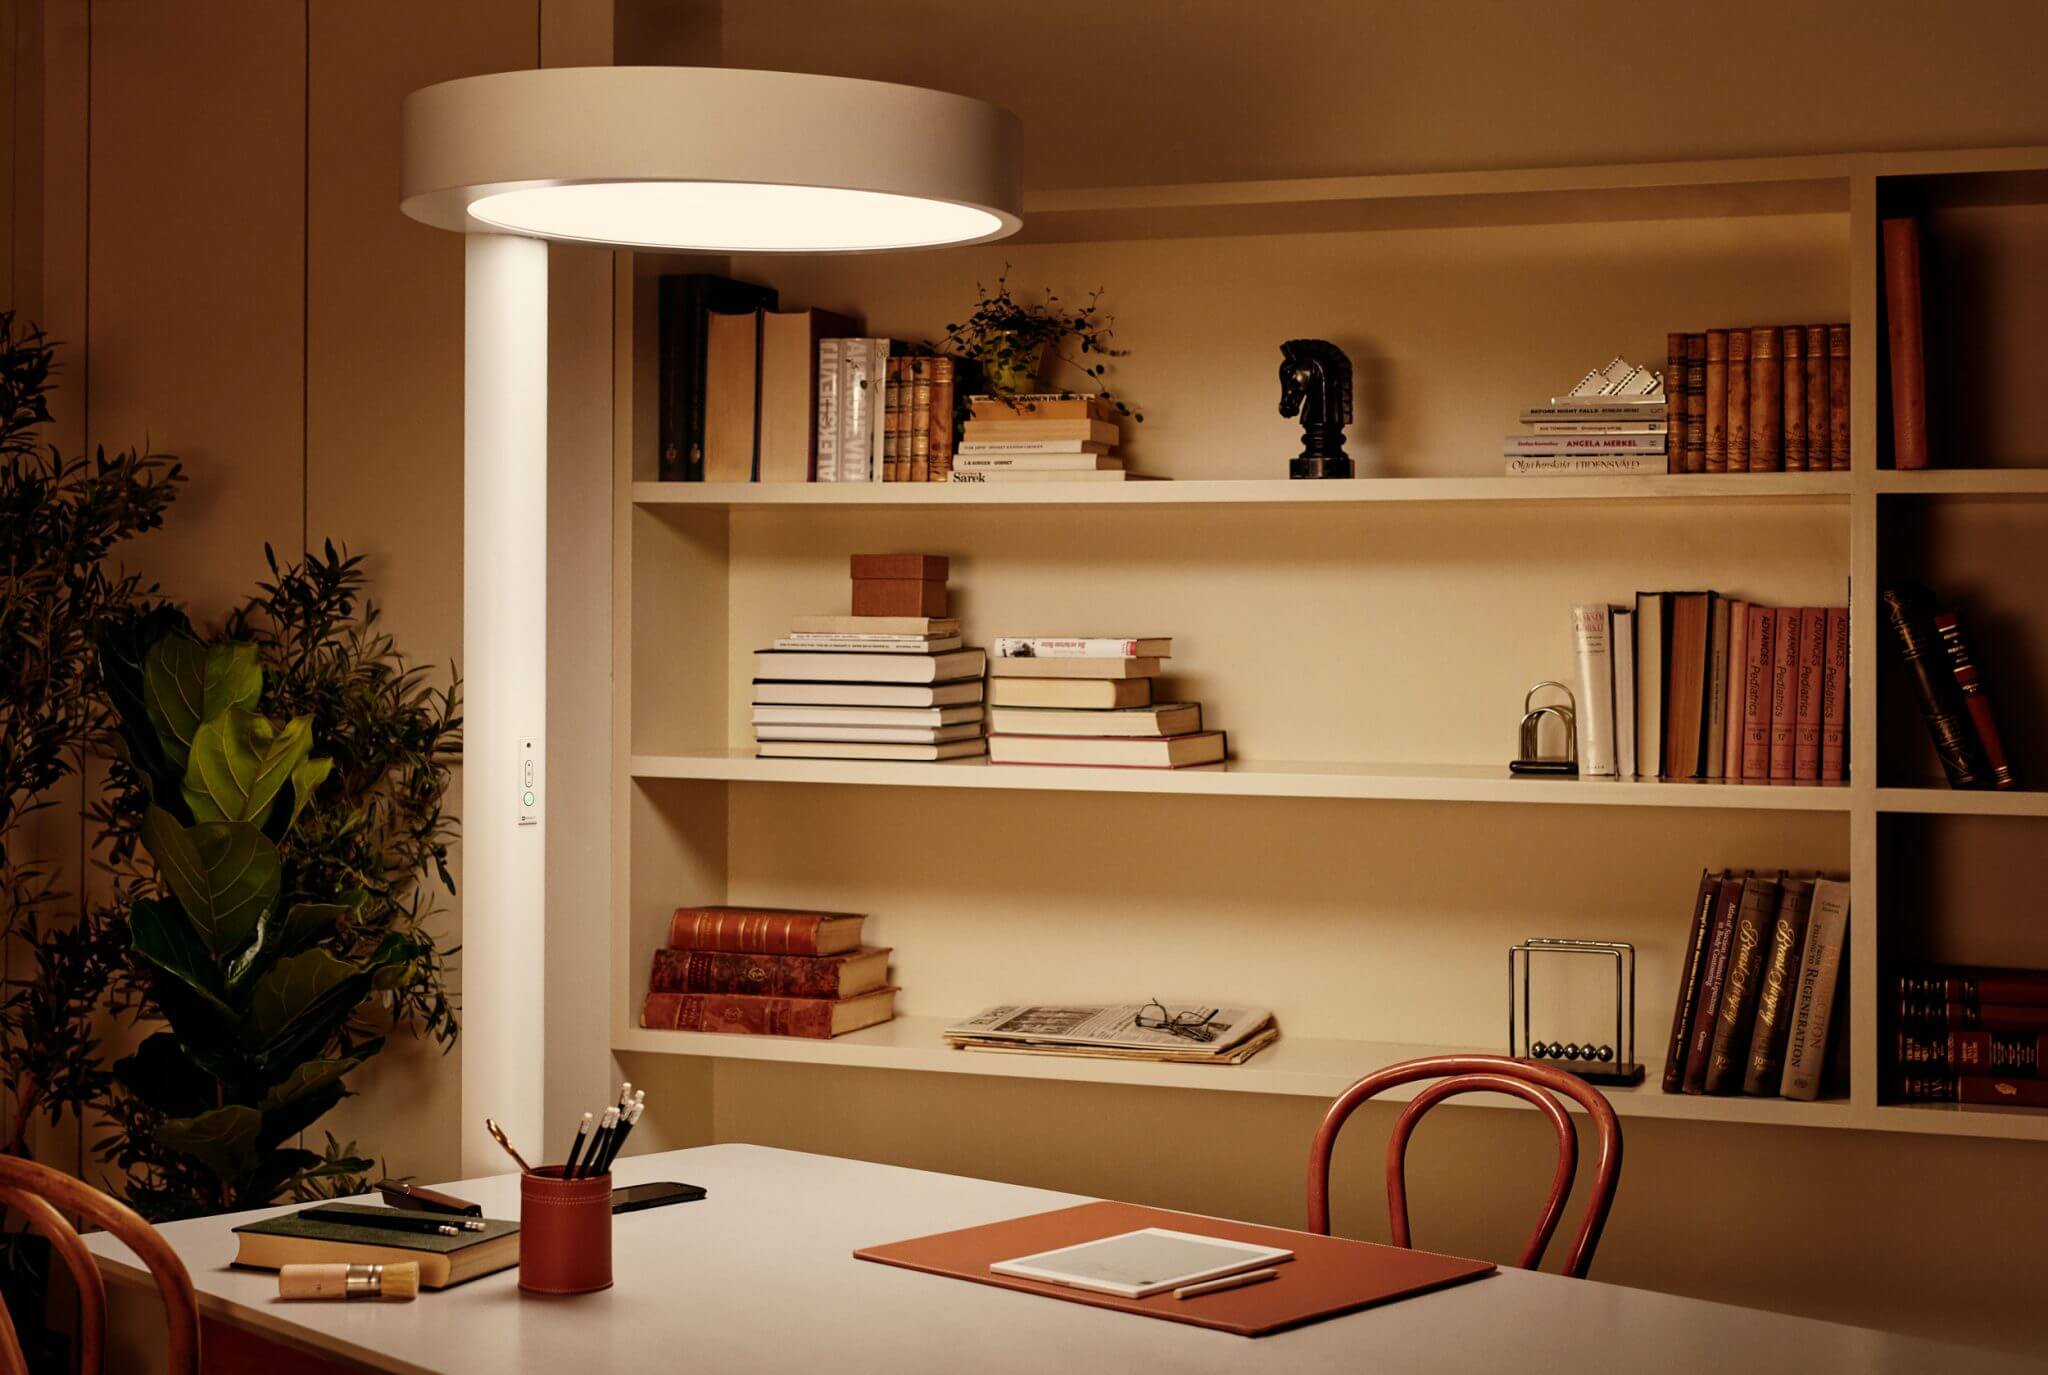 A white, circular standing lamp over a desk with a bookshelf in the background